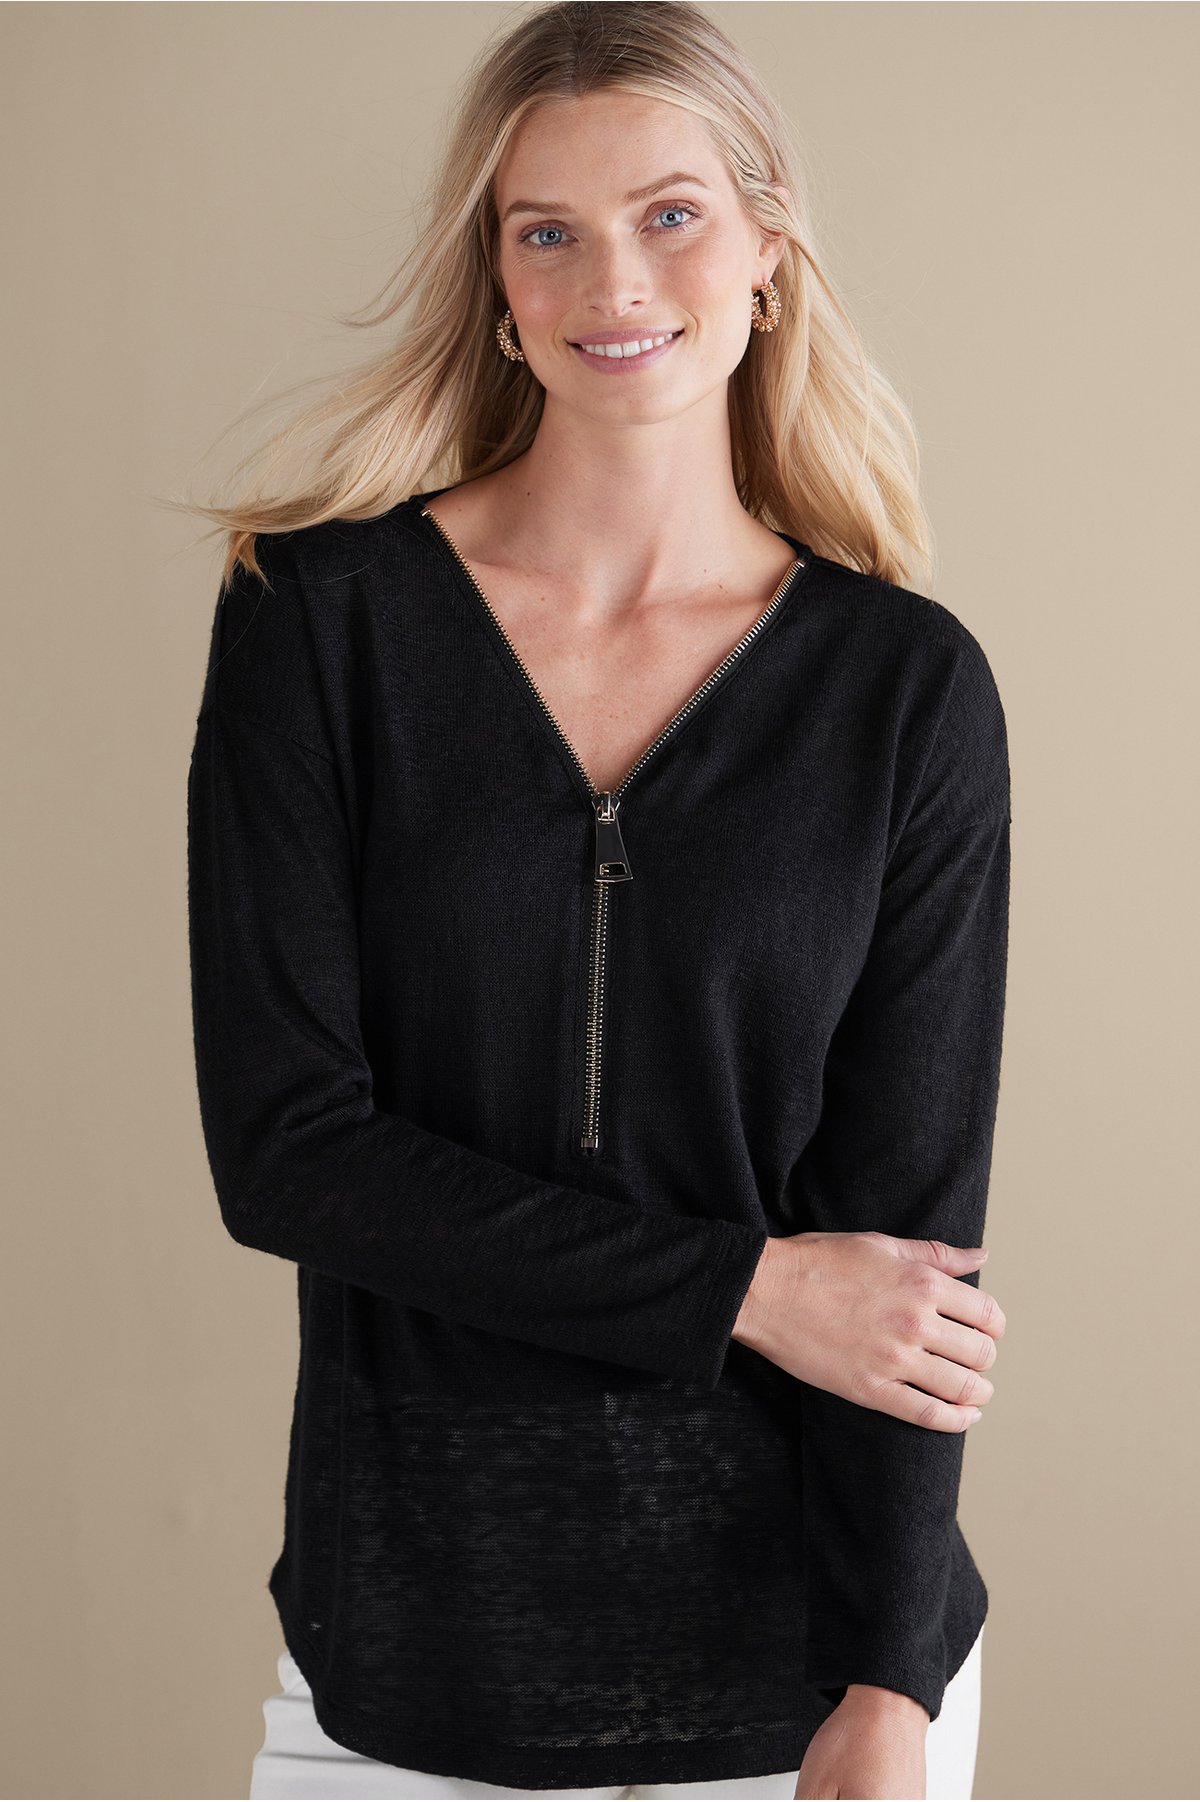 Women's Valentina Zip Sweater by Soft Surroundings, in Black size S (6-8)